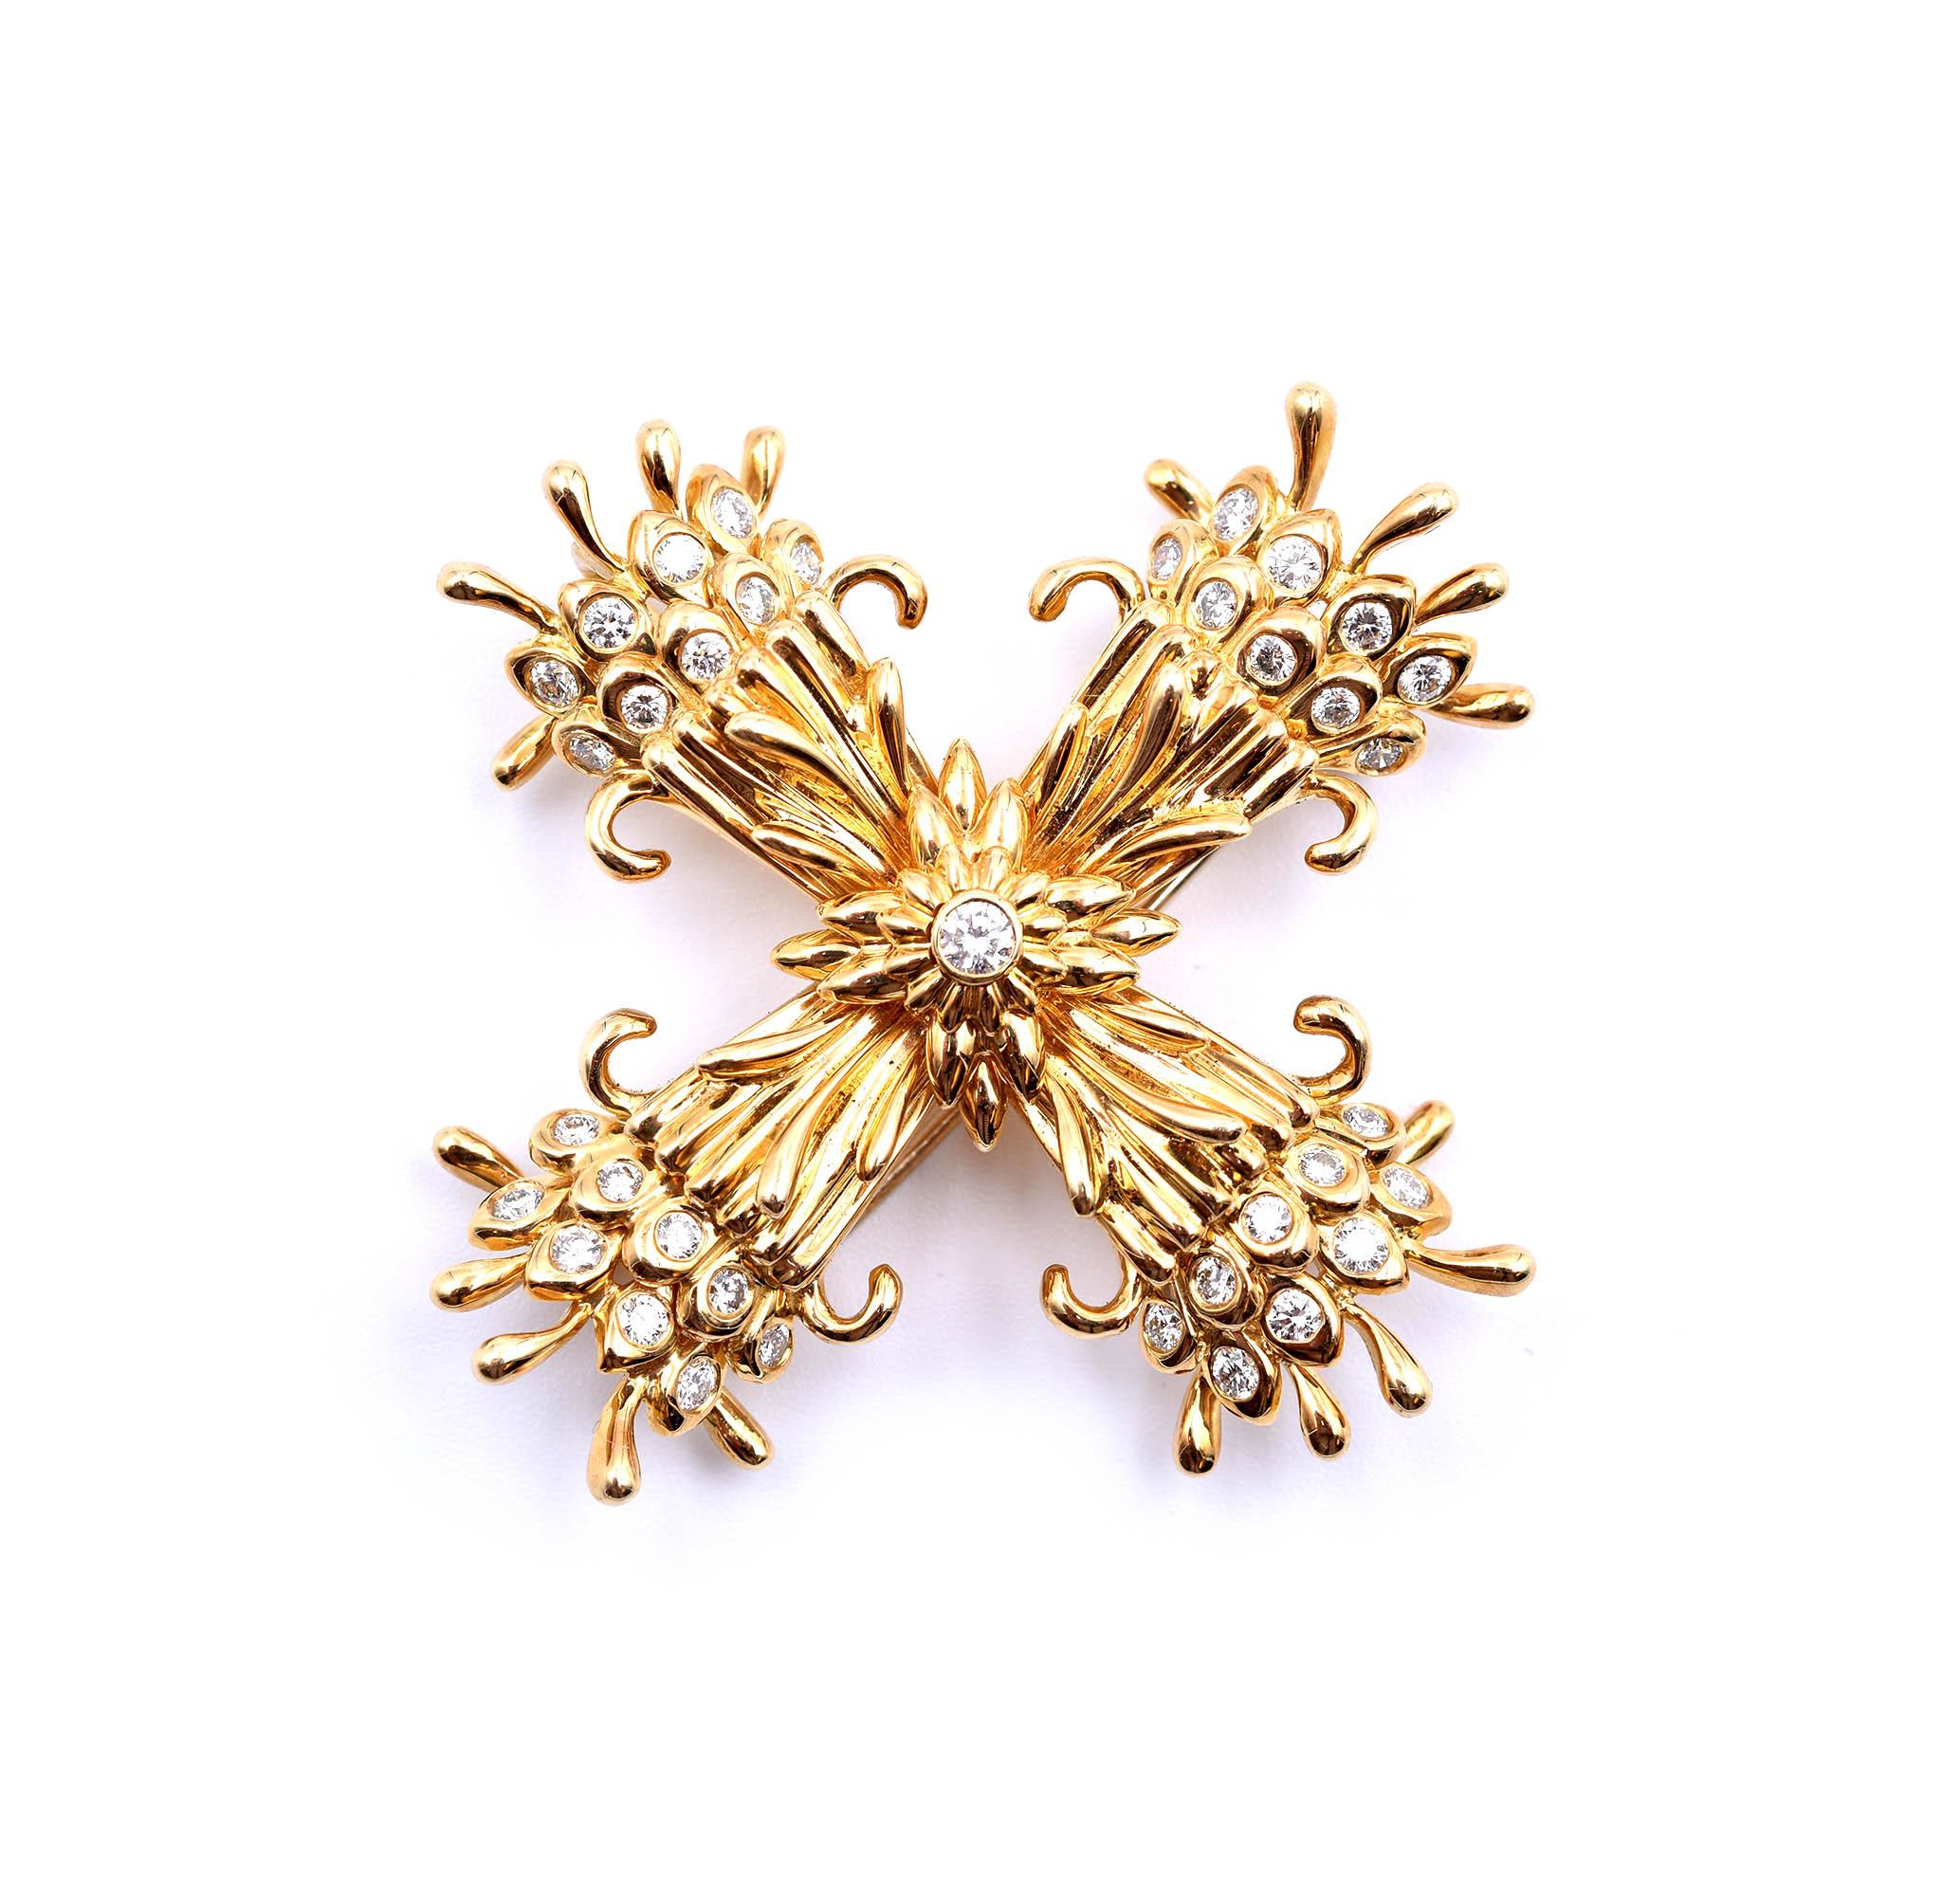 Designer: Tiffany & Co. Schlumberger
Material: 18k yellow gold
Diamonds: 37 round brilliant cut = 1.20cttw
Color: G
Clarity: VS
Dimensions: clip -brooch is approximately 50mm by 51mmm
Weight:  8.07 grams
